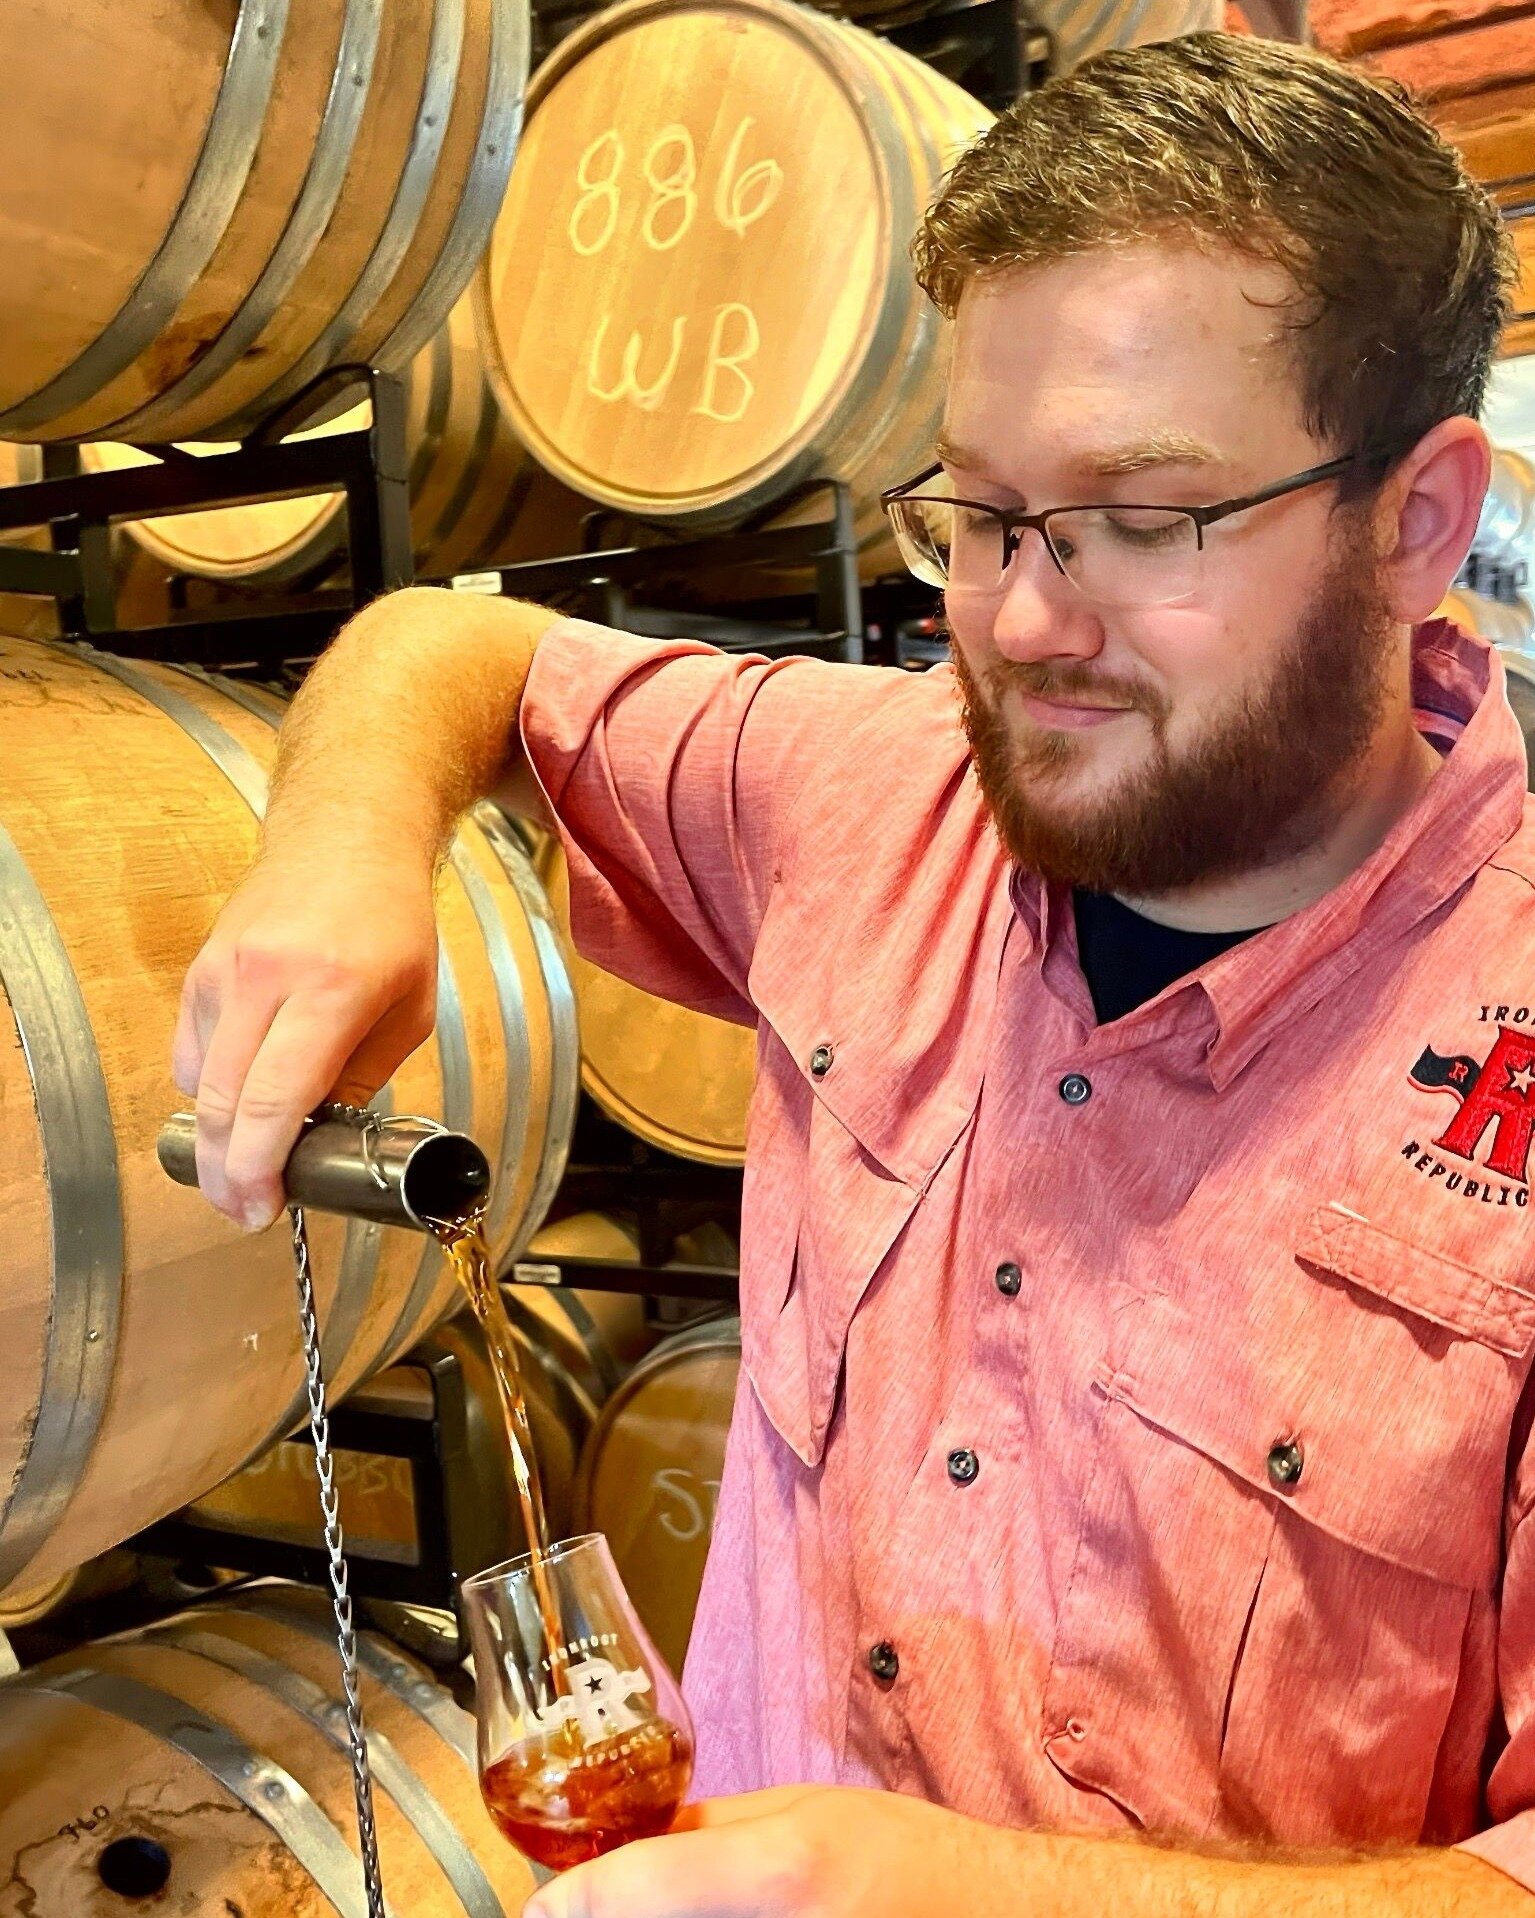 &ldquo;So what ultimately drew you to come work for the distillery?&rdquo;
&ldquo;I can&rsquo;t just say nepotism? No&hellip;the real answer is, I enjoy Robert and Jonathan&rsquo;s vision for what they are creating here, and the spirits we are making